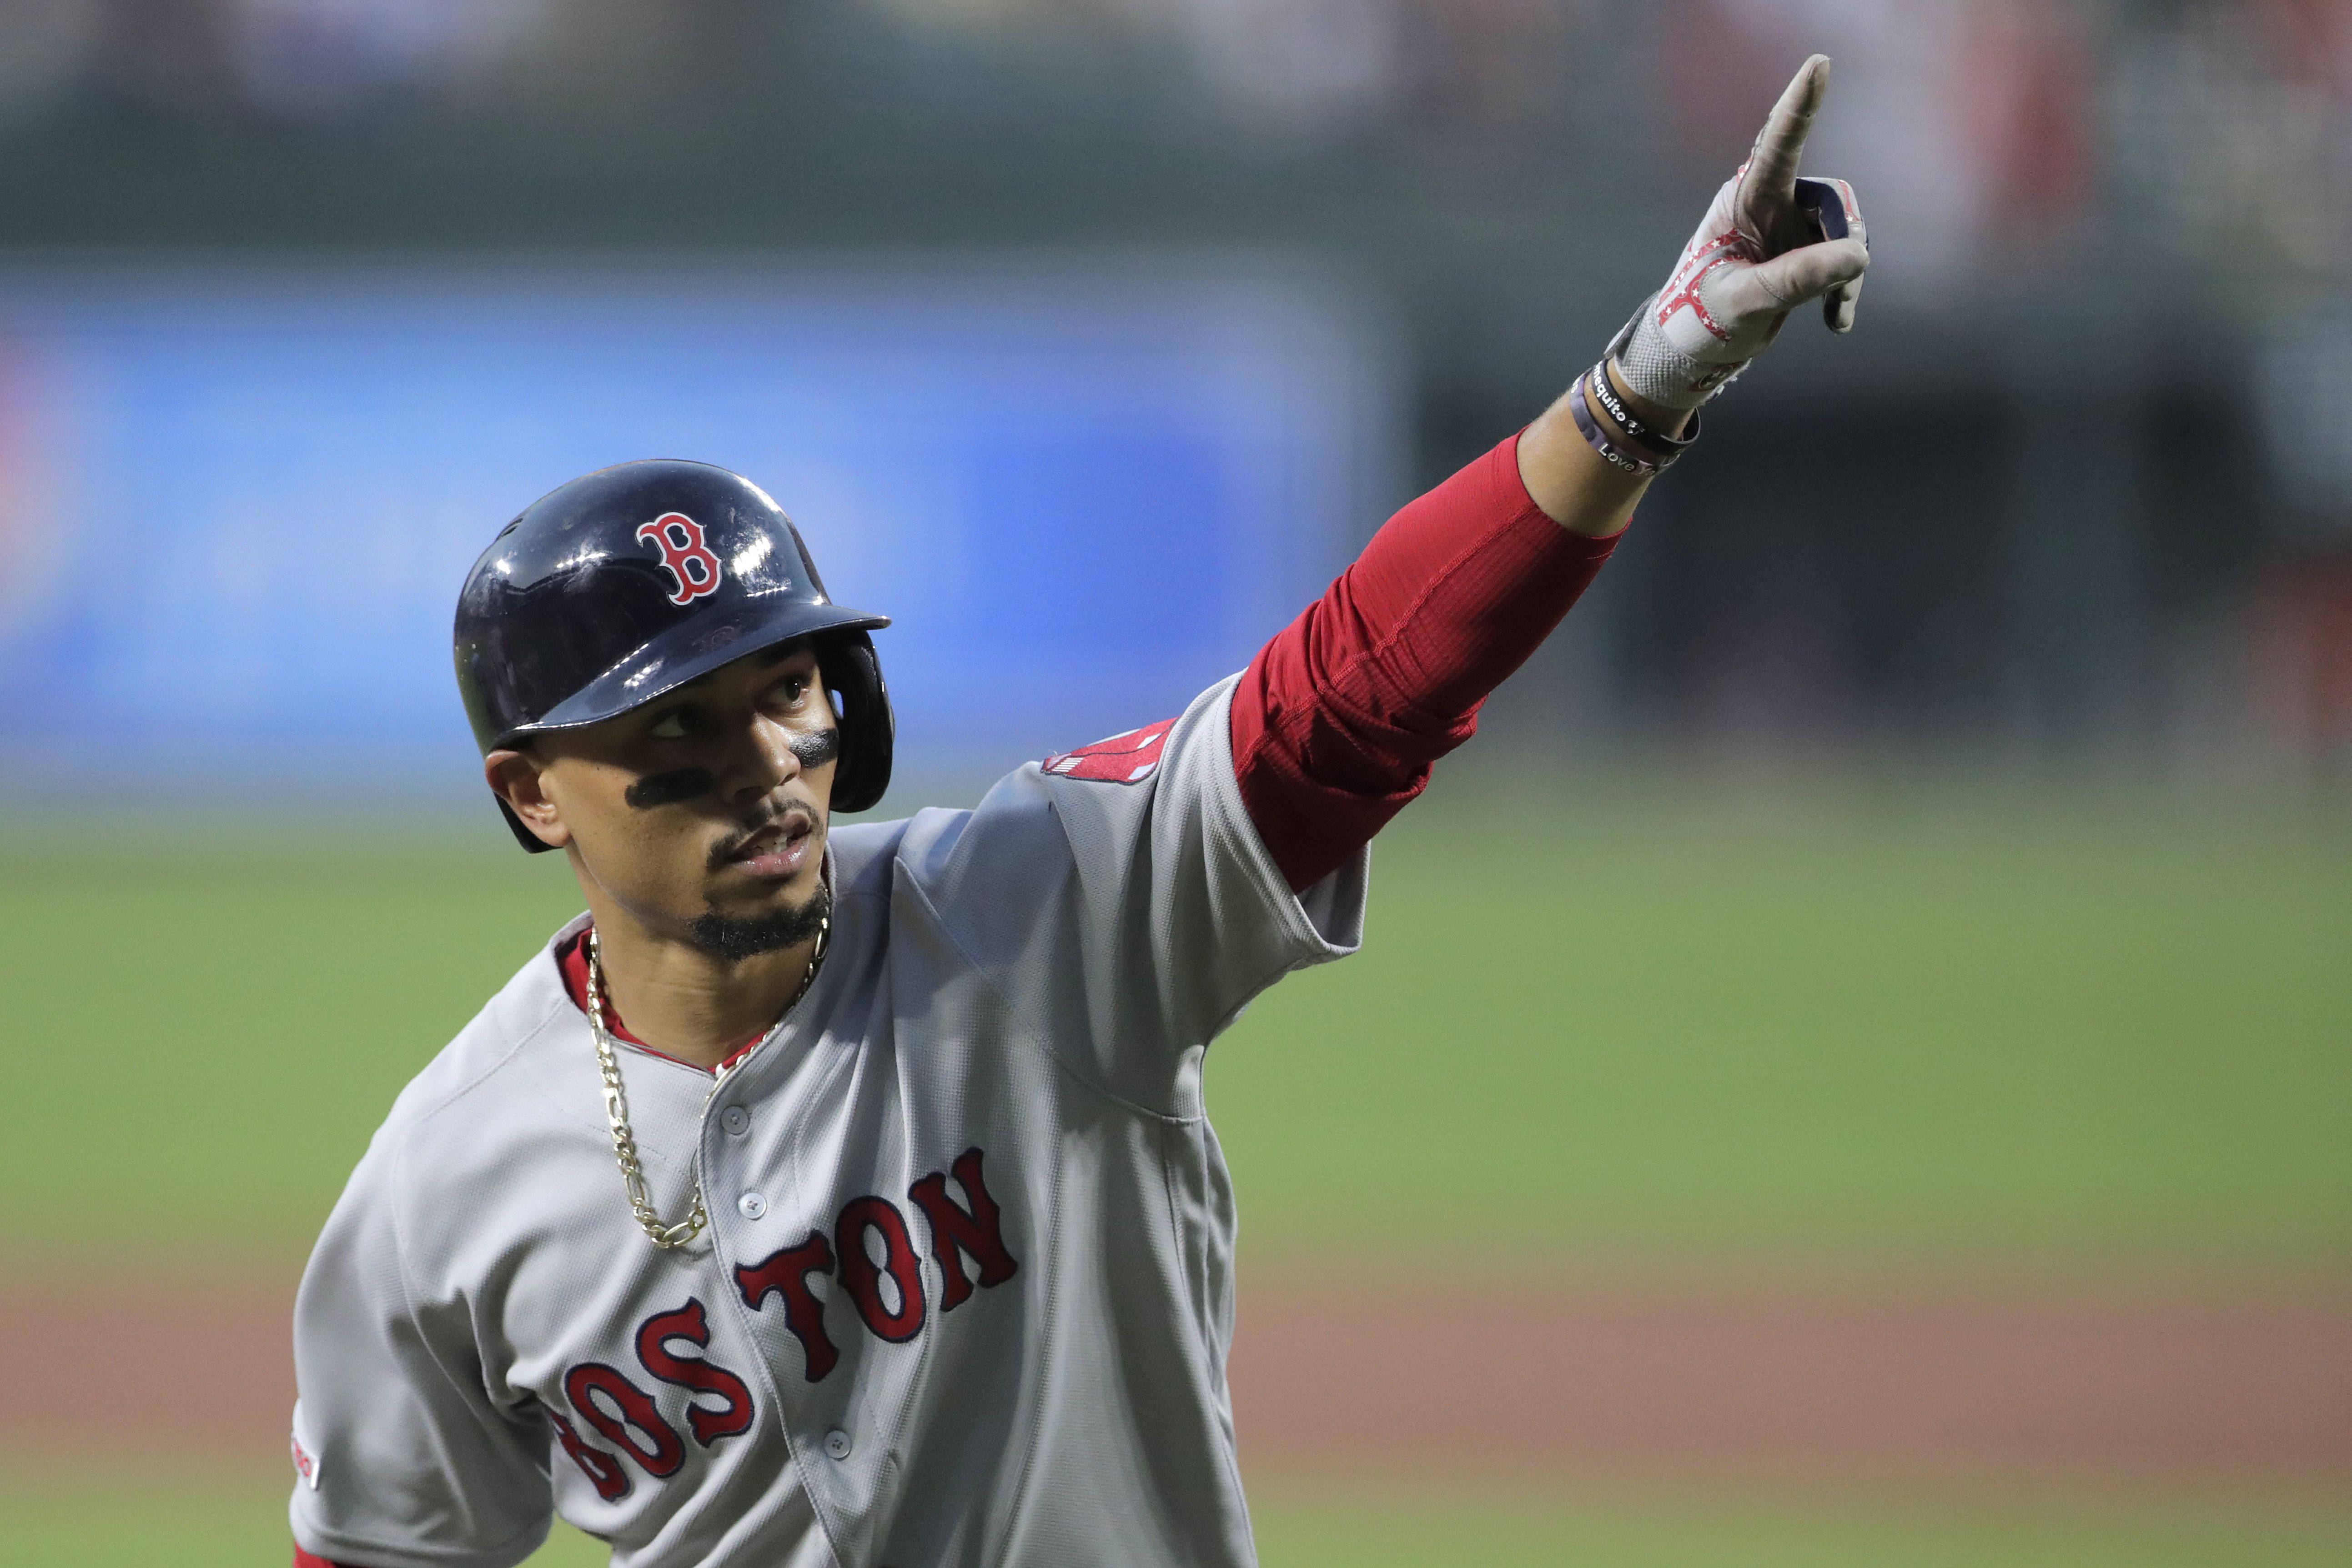 MOOKIE BETTS MADE A STRONG STATEMENT WITH SHIRT BEFORE ALL-STAR